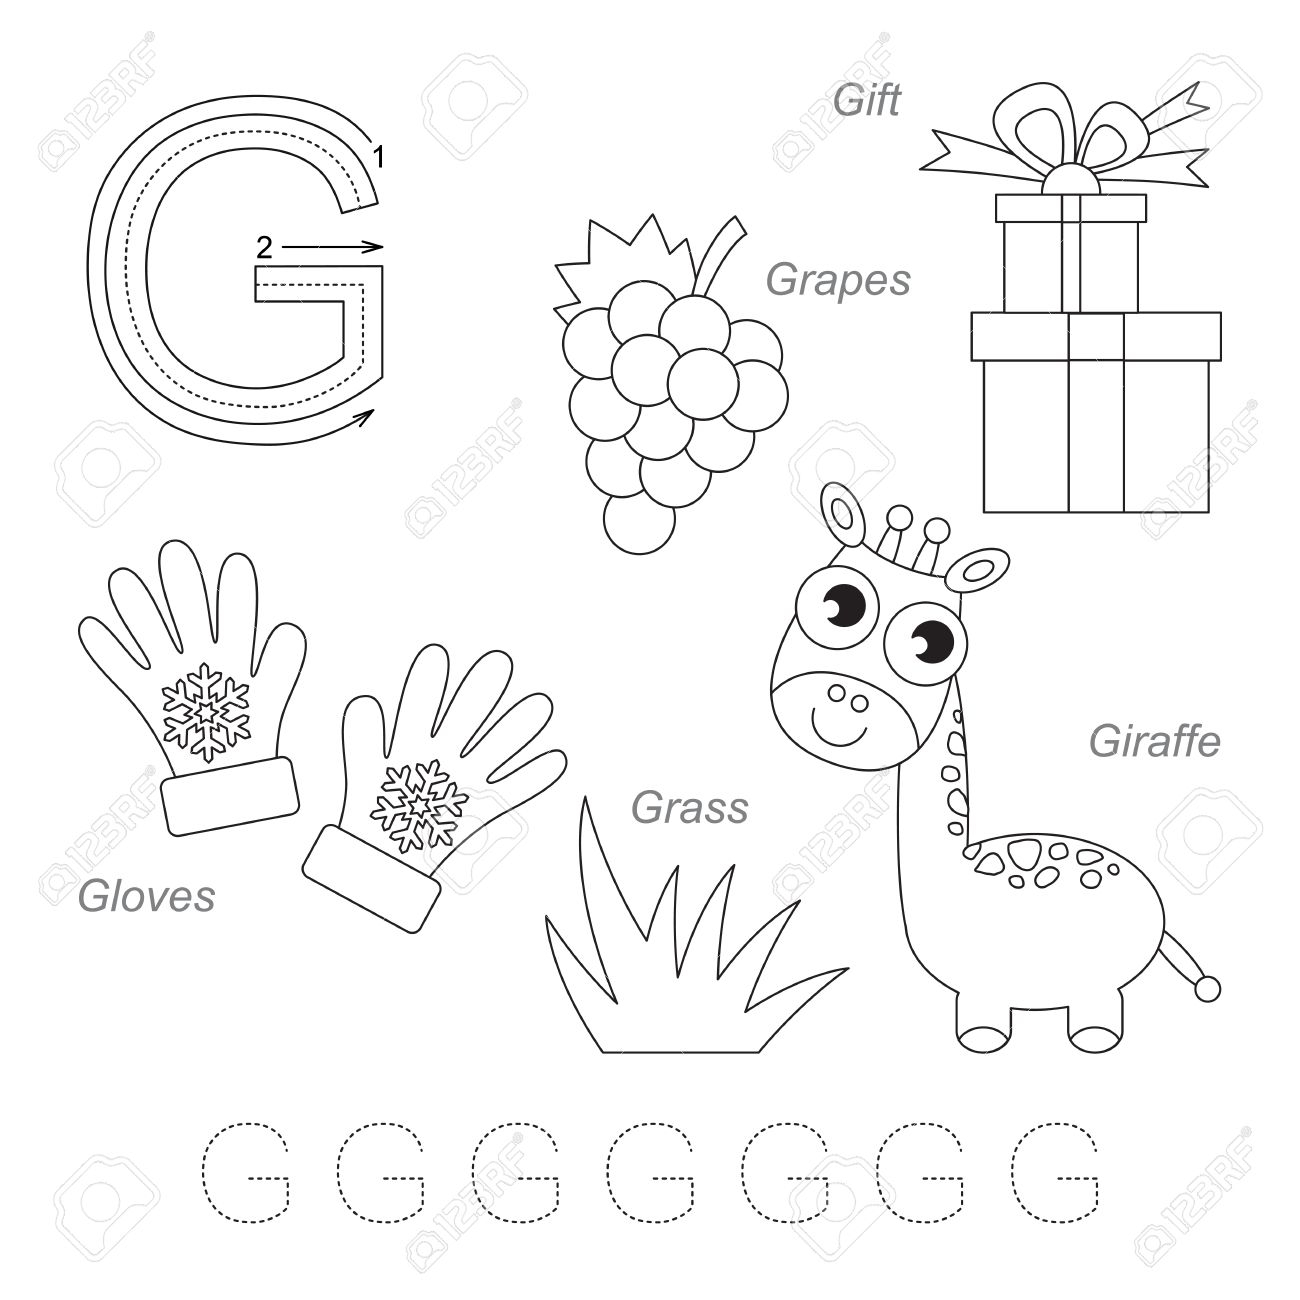 Tracing Worksheet For Children. Full English Alphabet From A..